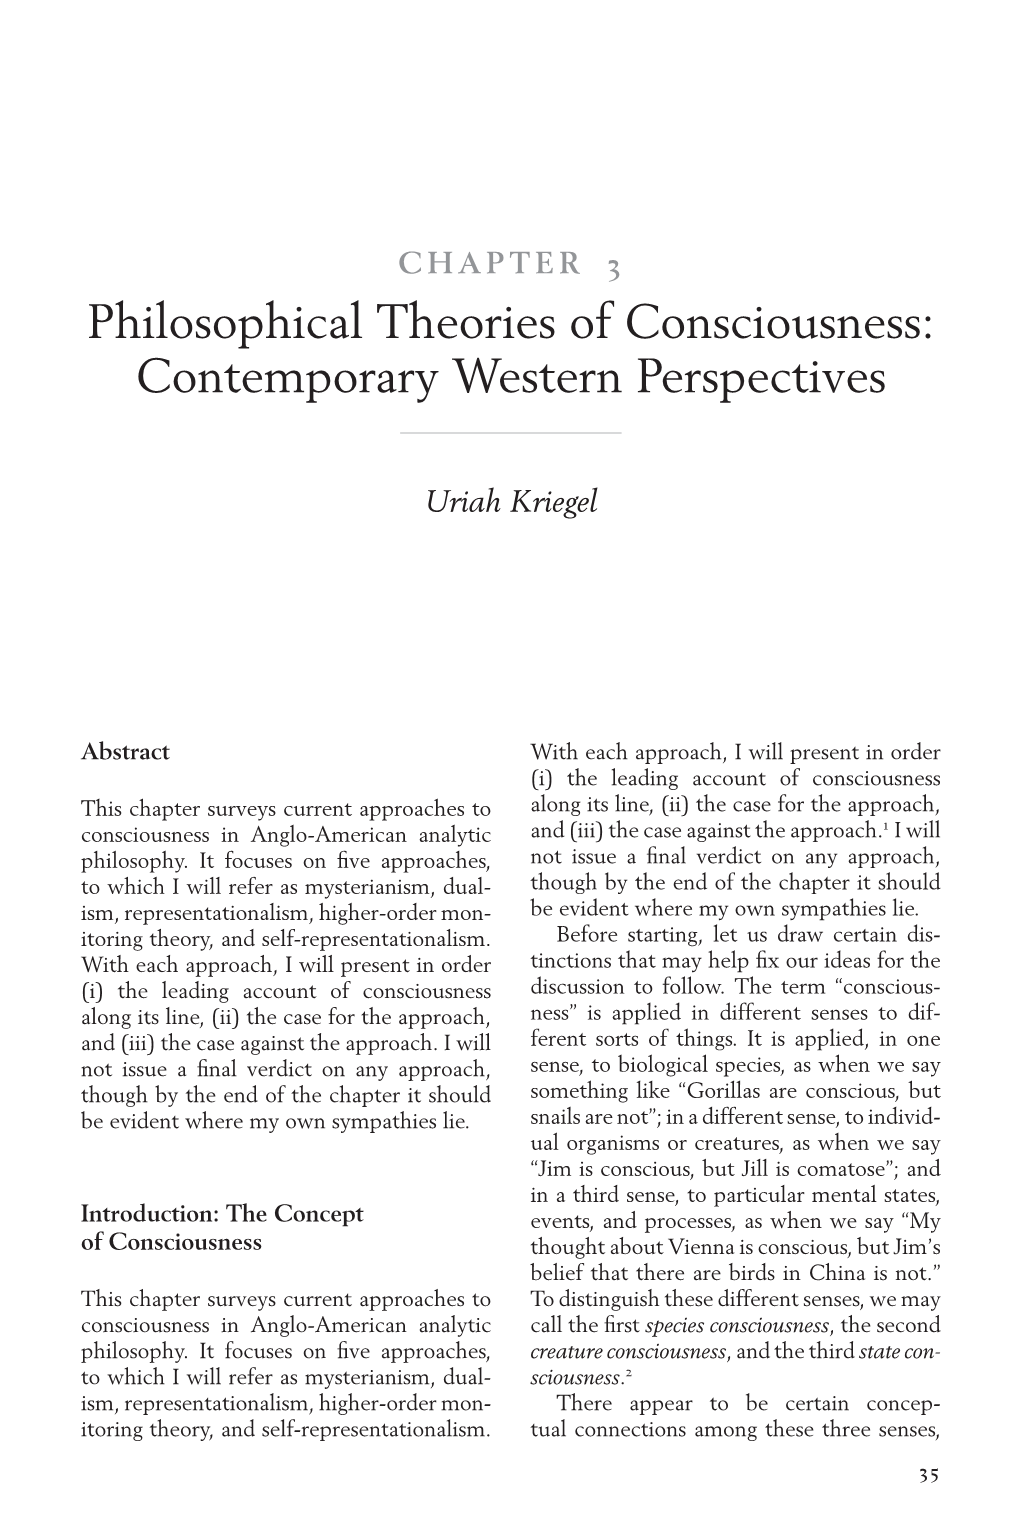 Philosophical Theories of Consciousness: Contemporary Western Perspectives